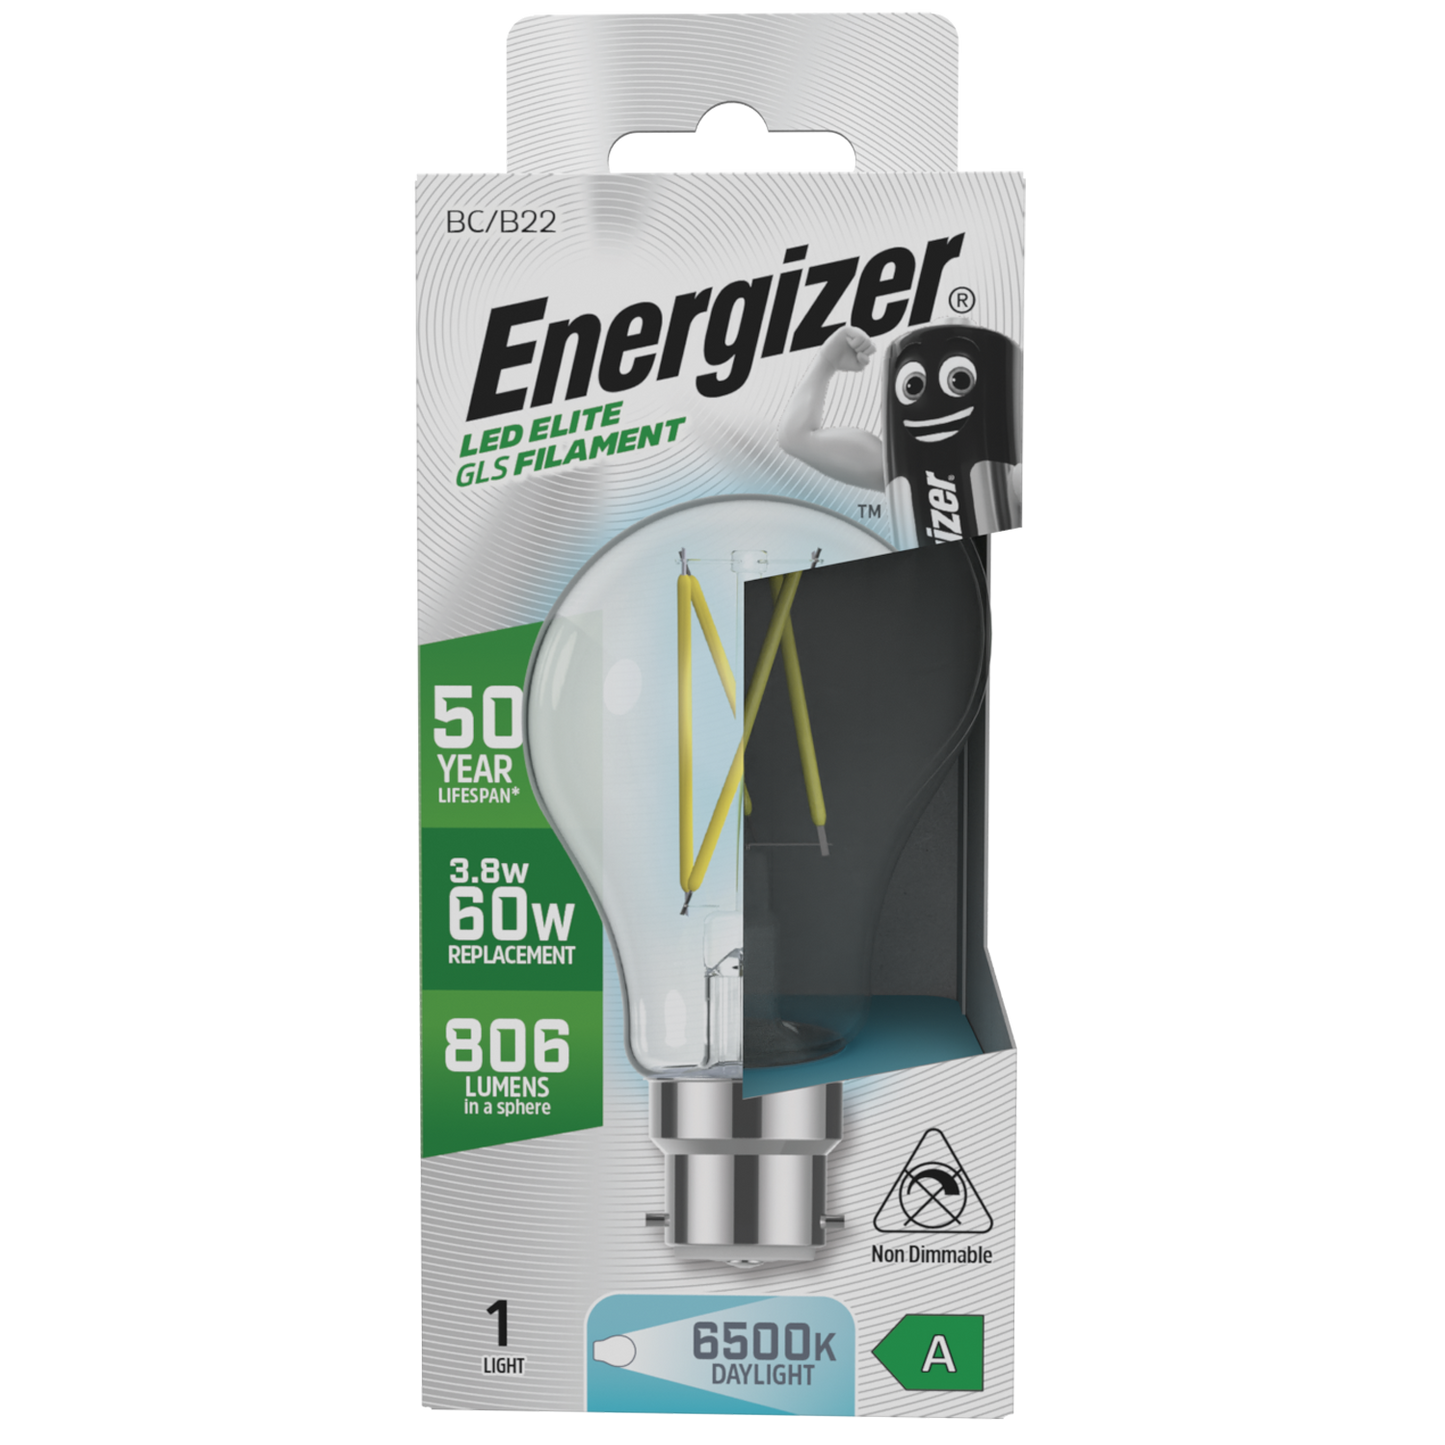 S29631 Energizer A Rated LED Elite GLS B22 Filament 806lm 3.8W 6500K (Daylight) - Box of 1